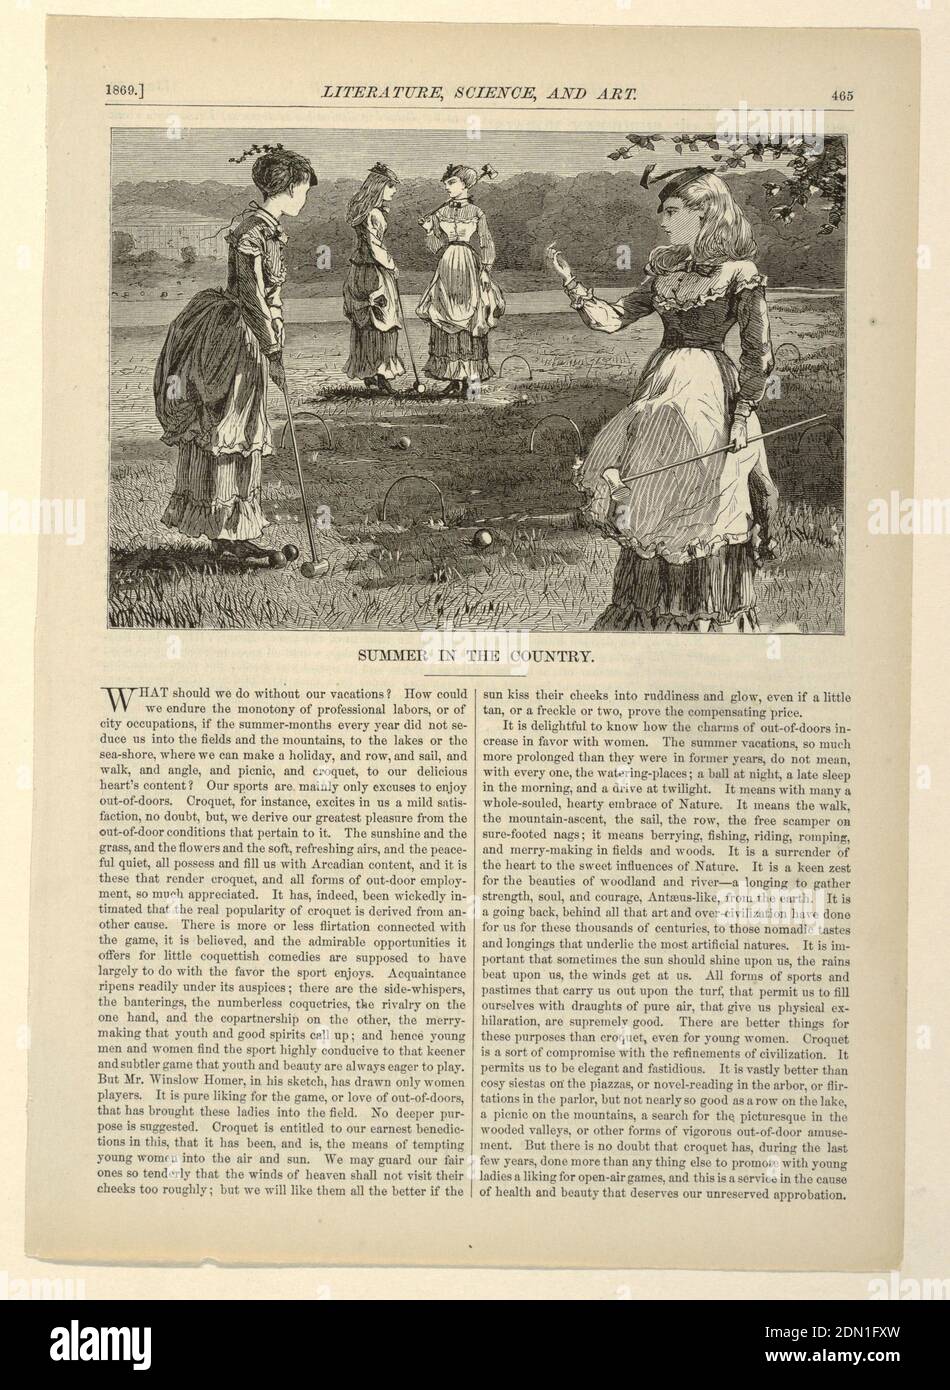 Summer in the Country, Winslow Homer, American, 1836–1910, John Karst, German, active in U.S., 1836 - 1922, Appleton's Journal of Literature, Science and Art, D. Appleton and Company, New York, NY, D. Appleton and Company, New York, Wood engraving in black ink on paper, Four ladies playing croquet. In the right foreground, a young lady appears to be looking at her nails on her right hand, while the girl on the left rests her foot on a croquet ball and looks at the two other girls in the background., USA, July 10, 1869, figures, Print Stock Photo